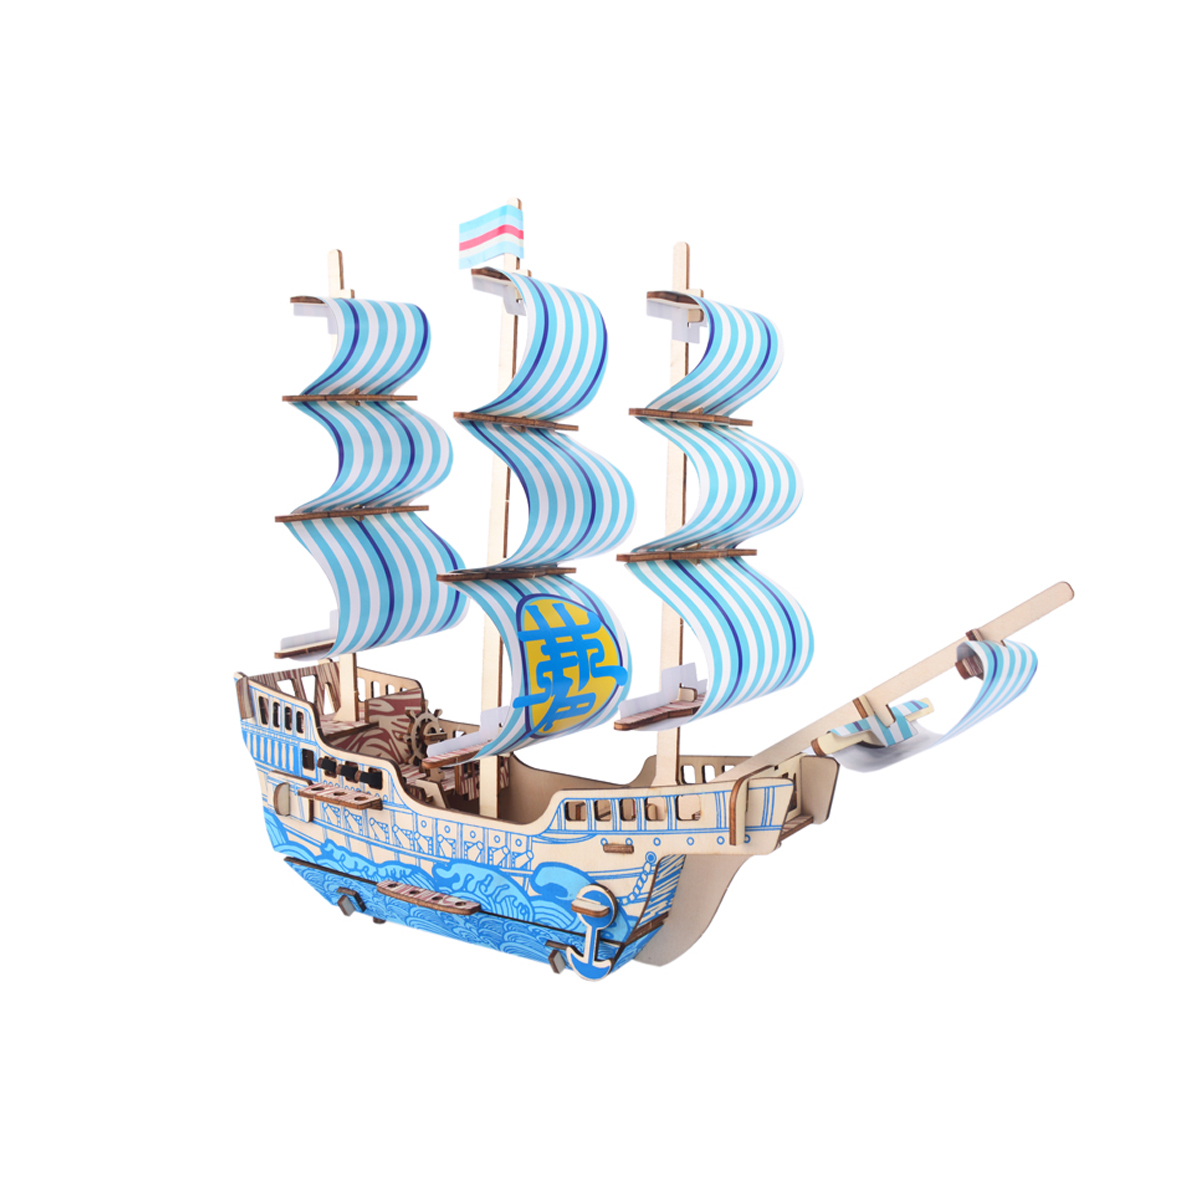 3D-Woodcraft-Assembly-Sailing-Series-Kit-Jigsaw-Puzzle-Decoration-Toy-Model-for-Kids-Gift-1635638-6